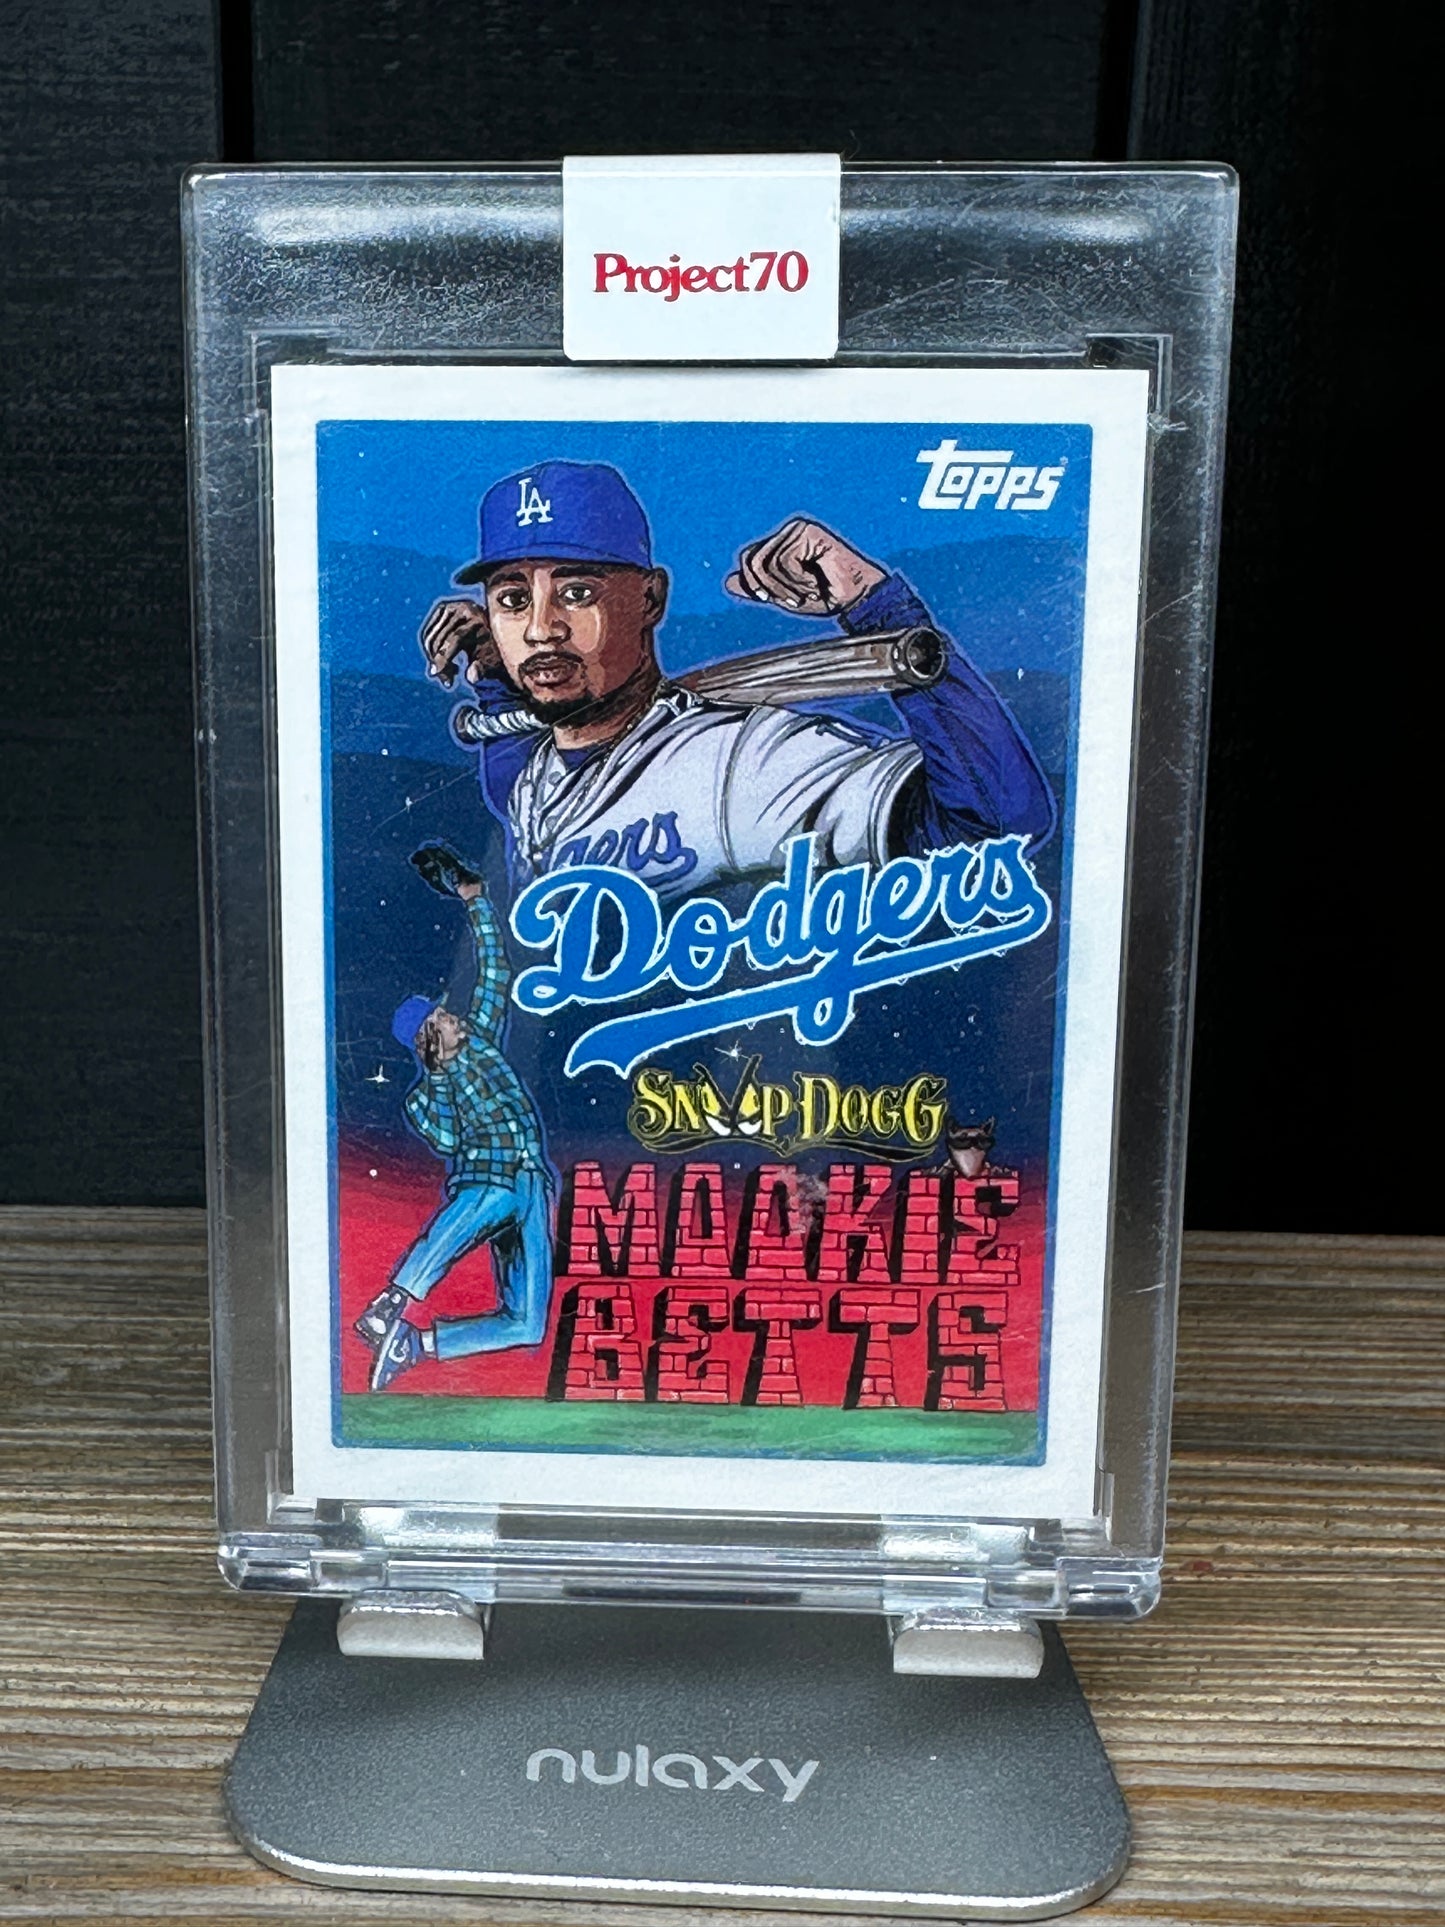 Mookie Betts Topps Project 70 Card 89 - 1993 by Snoop Dogg